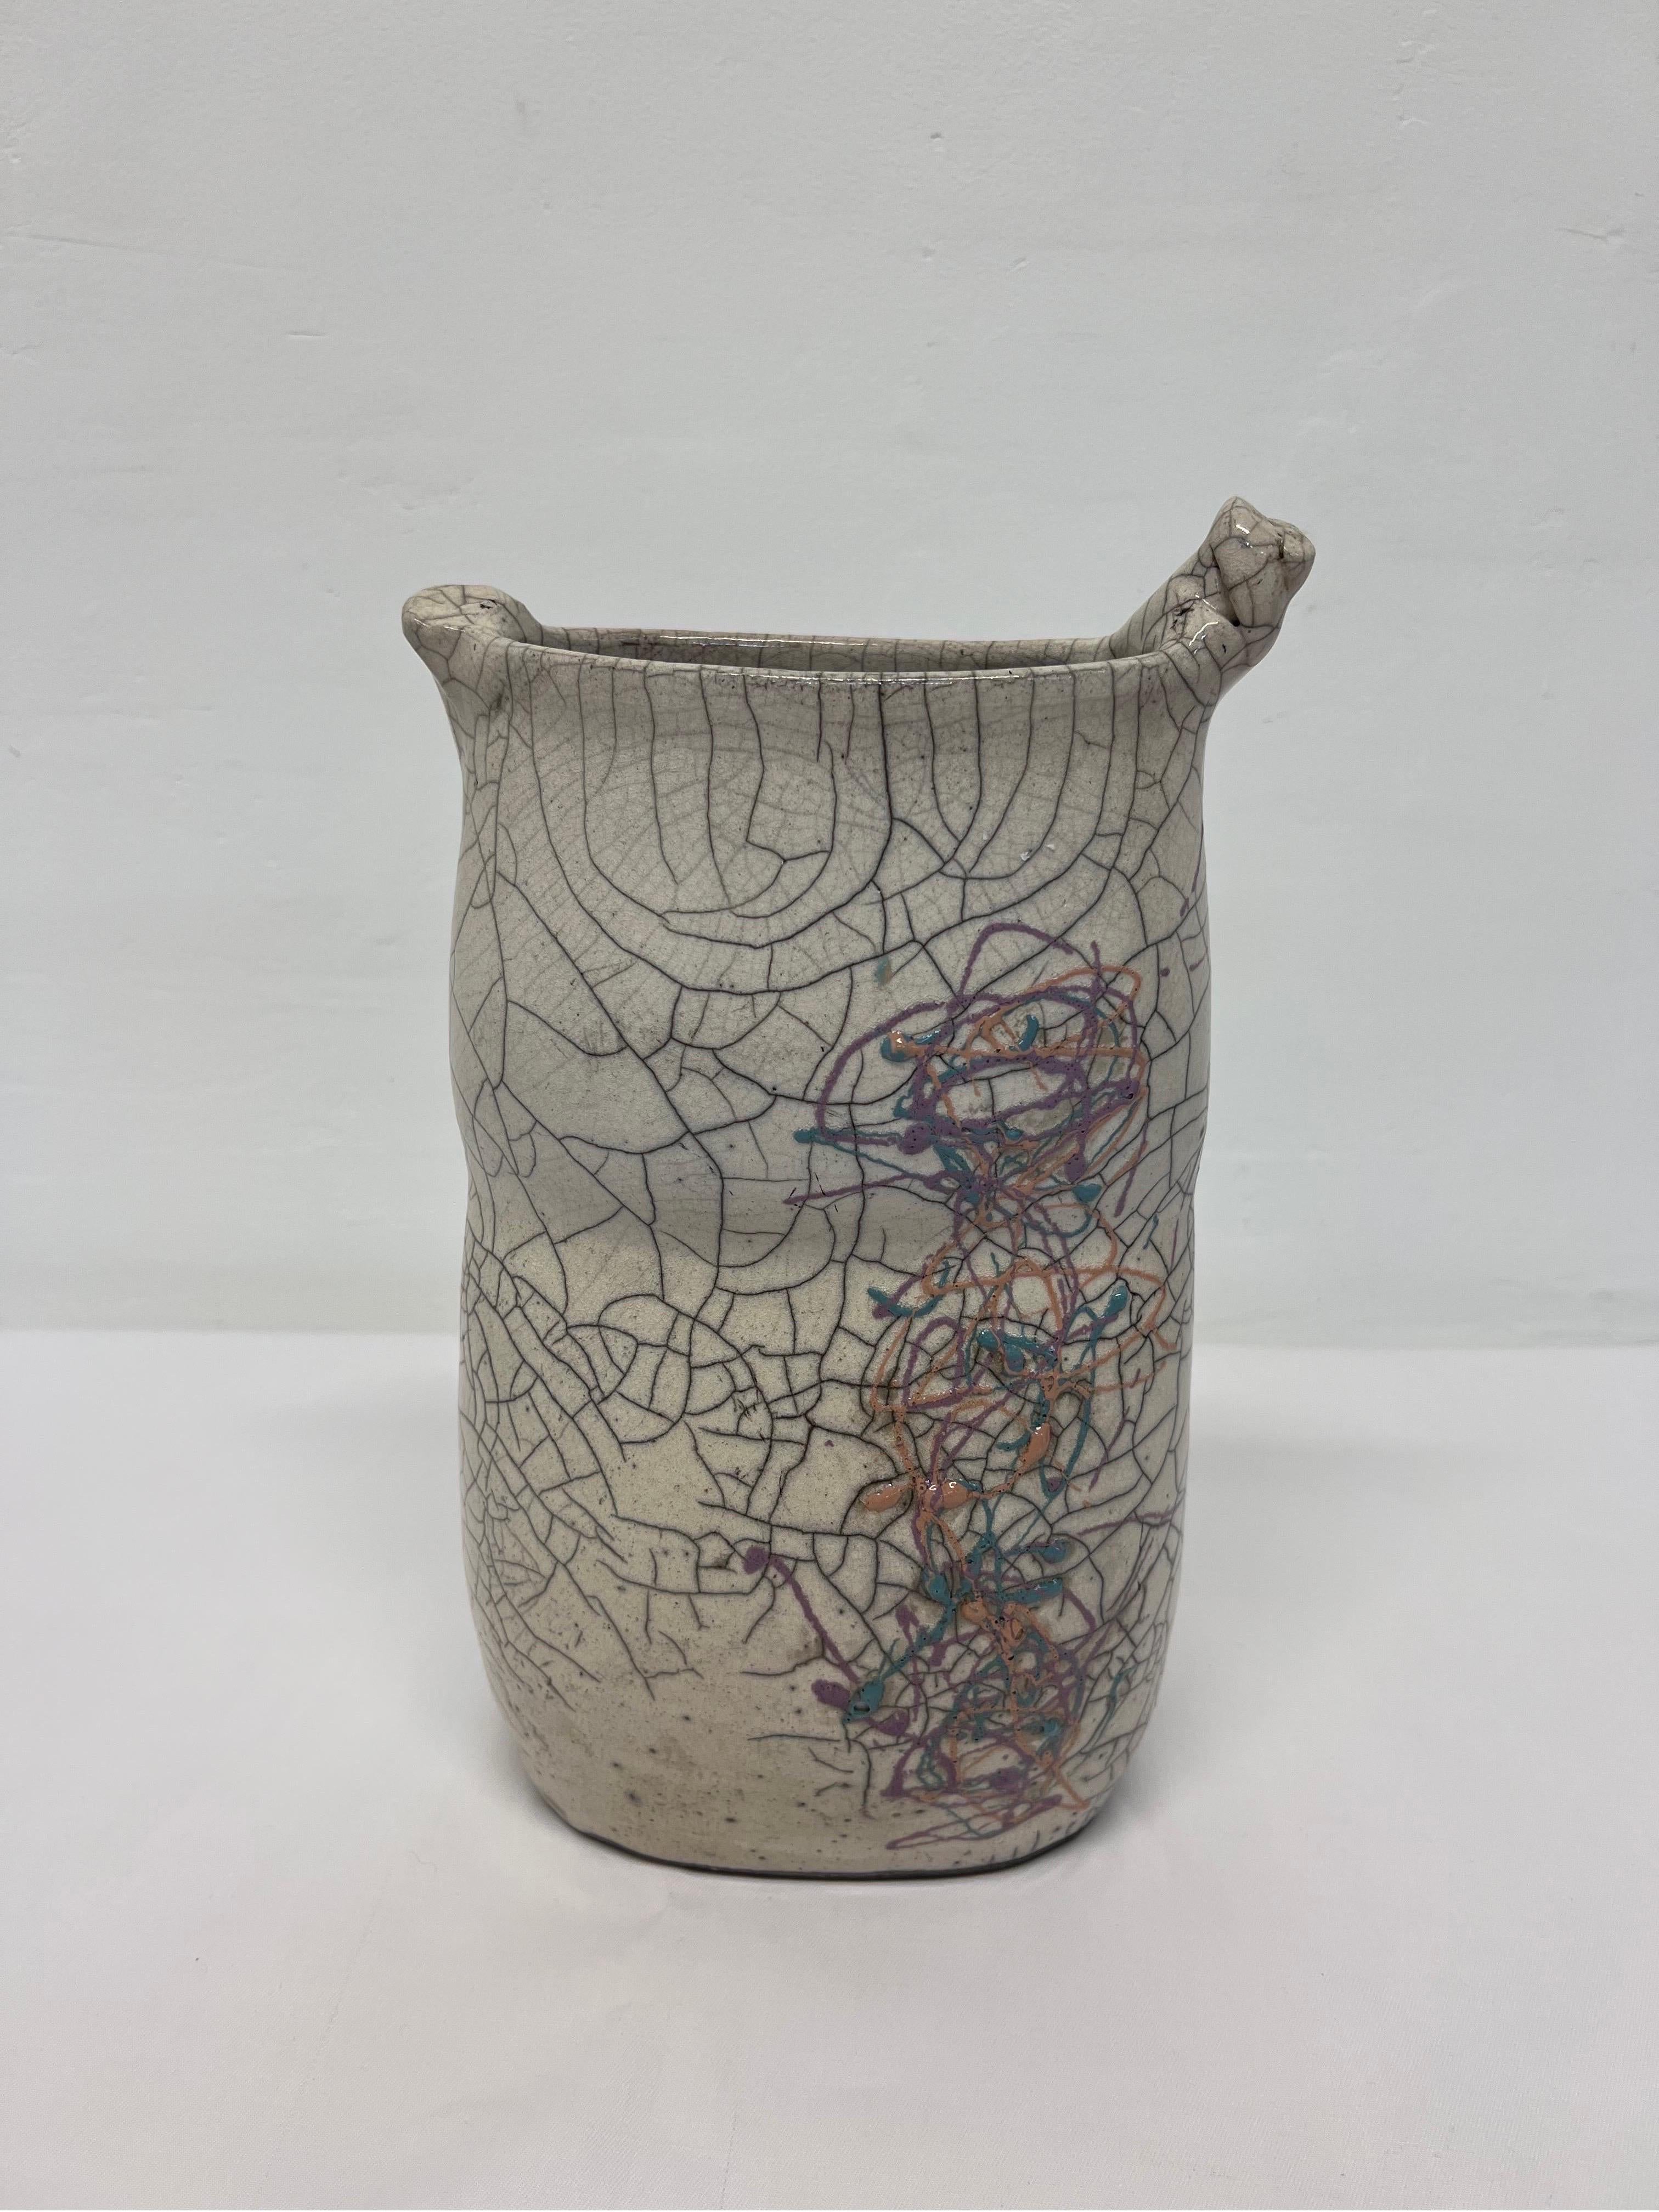 Crackled glaze studio pottery vase with artistic design from the 1980s. Signed by artist.